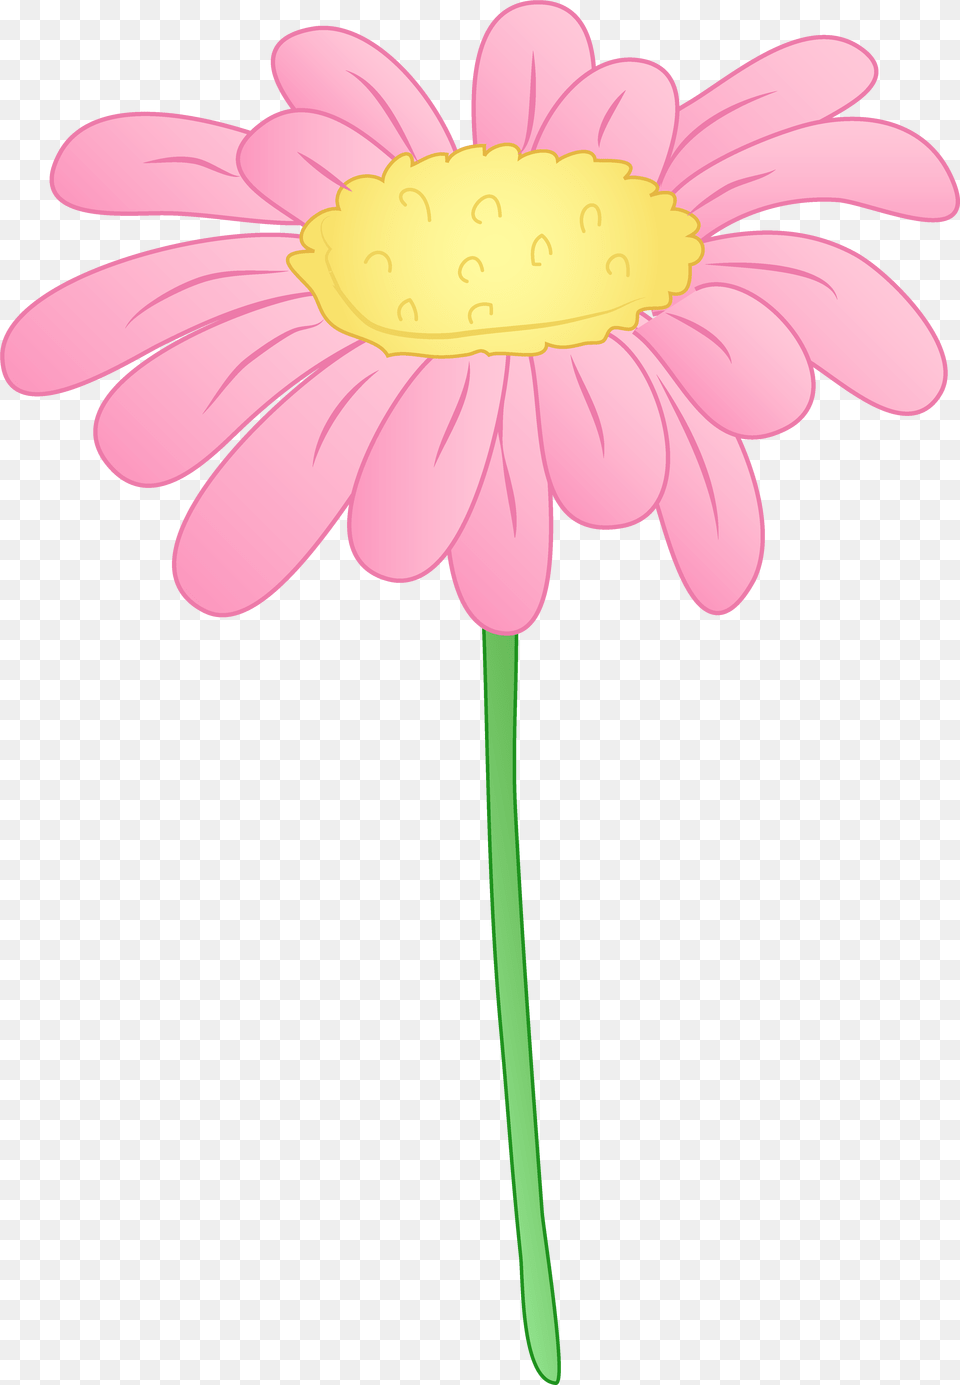 Library Of Flower Cartoon Files Cartoon Image Single Flowers, Daisy, Petal, Plant, Anther Png